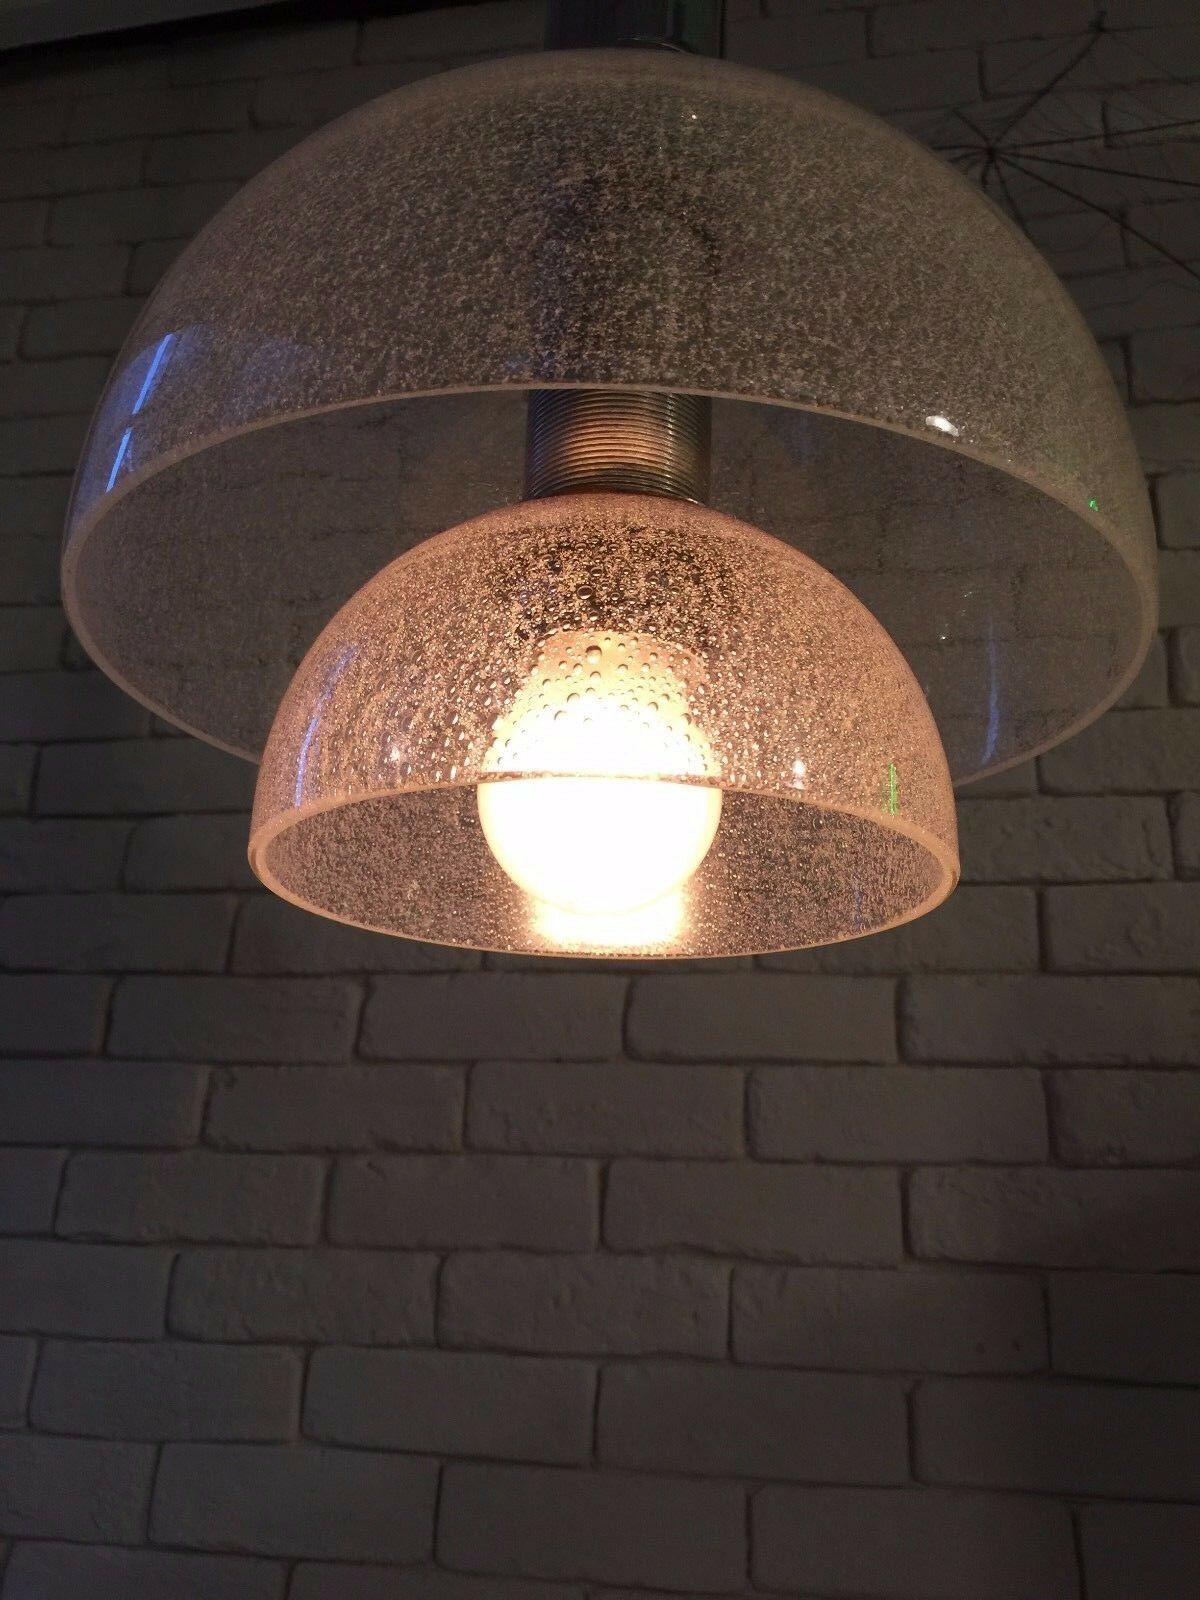 This Mid-Century Modern pendant lamp is composed of a two-layer Peleguso glass dome, held by a polished nickel-plated stem and canopy. It was designed by Carlo Nason in the 1960s and manufactured by Mazzega in Italy. The lamp needs 1 x E27 screwfit